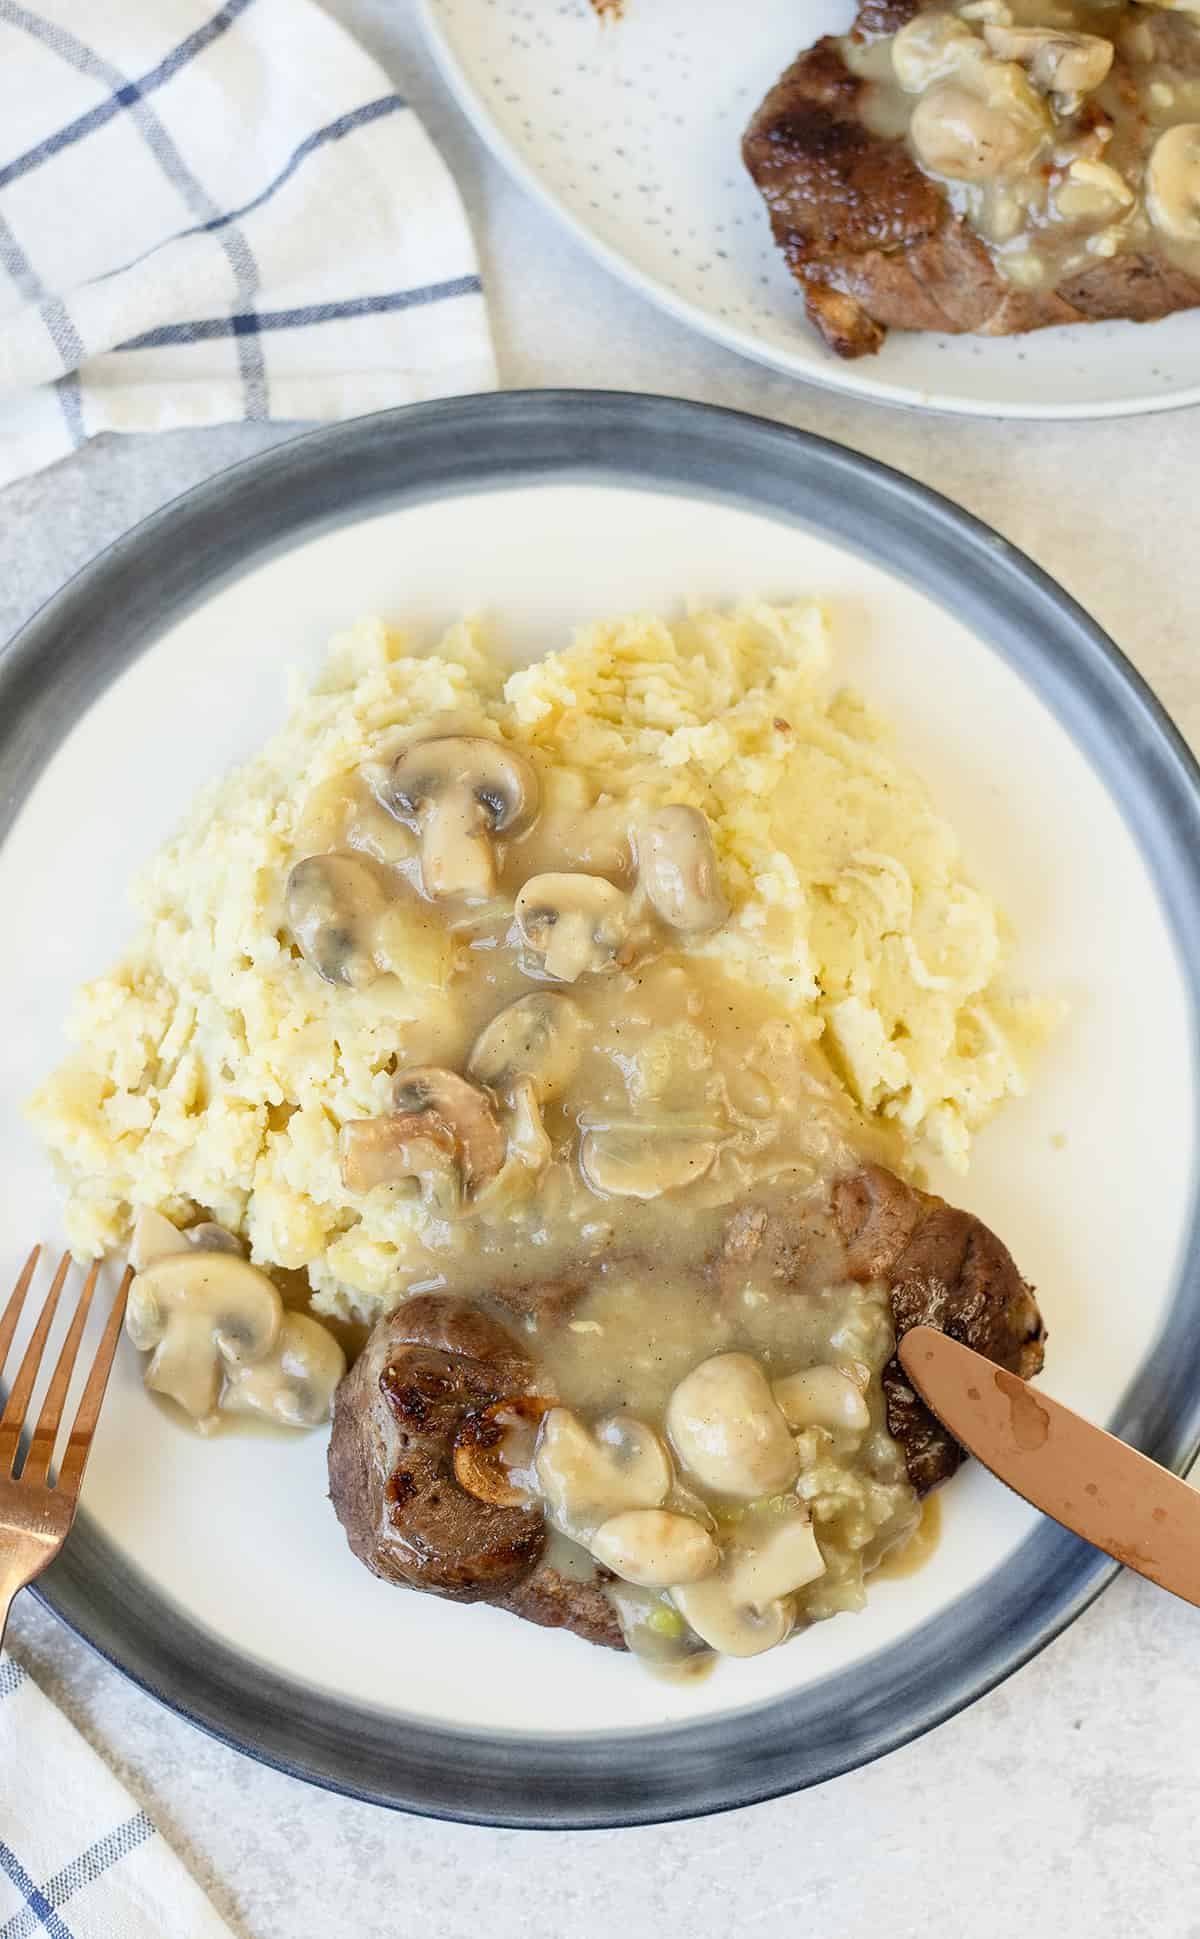 Steaks with Mushroom Gravy and mashed potatoes in a plate.